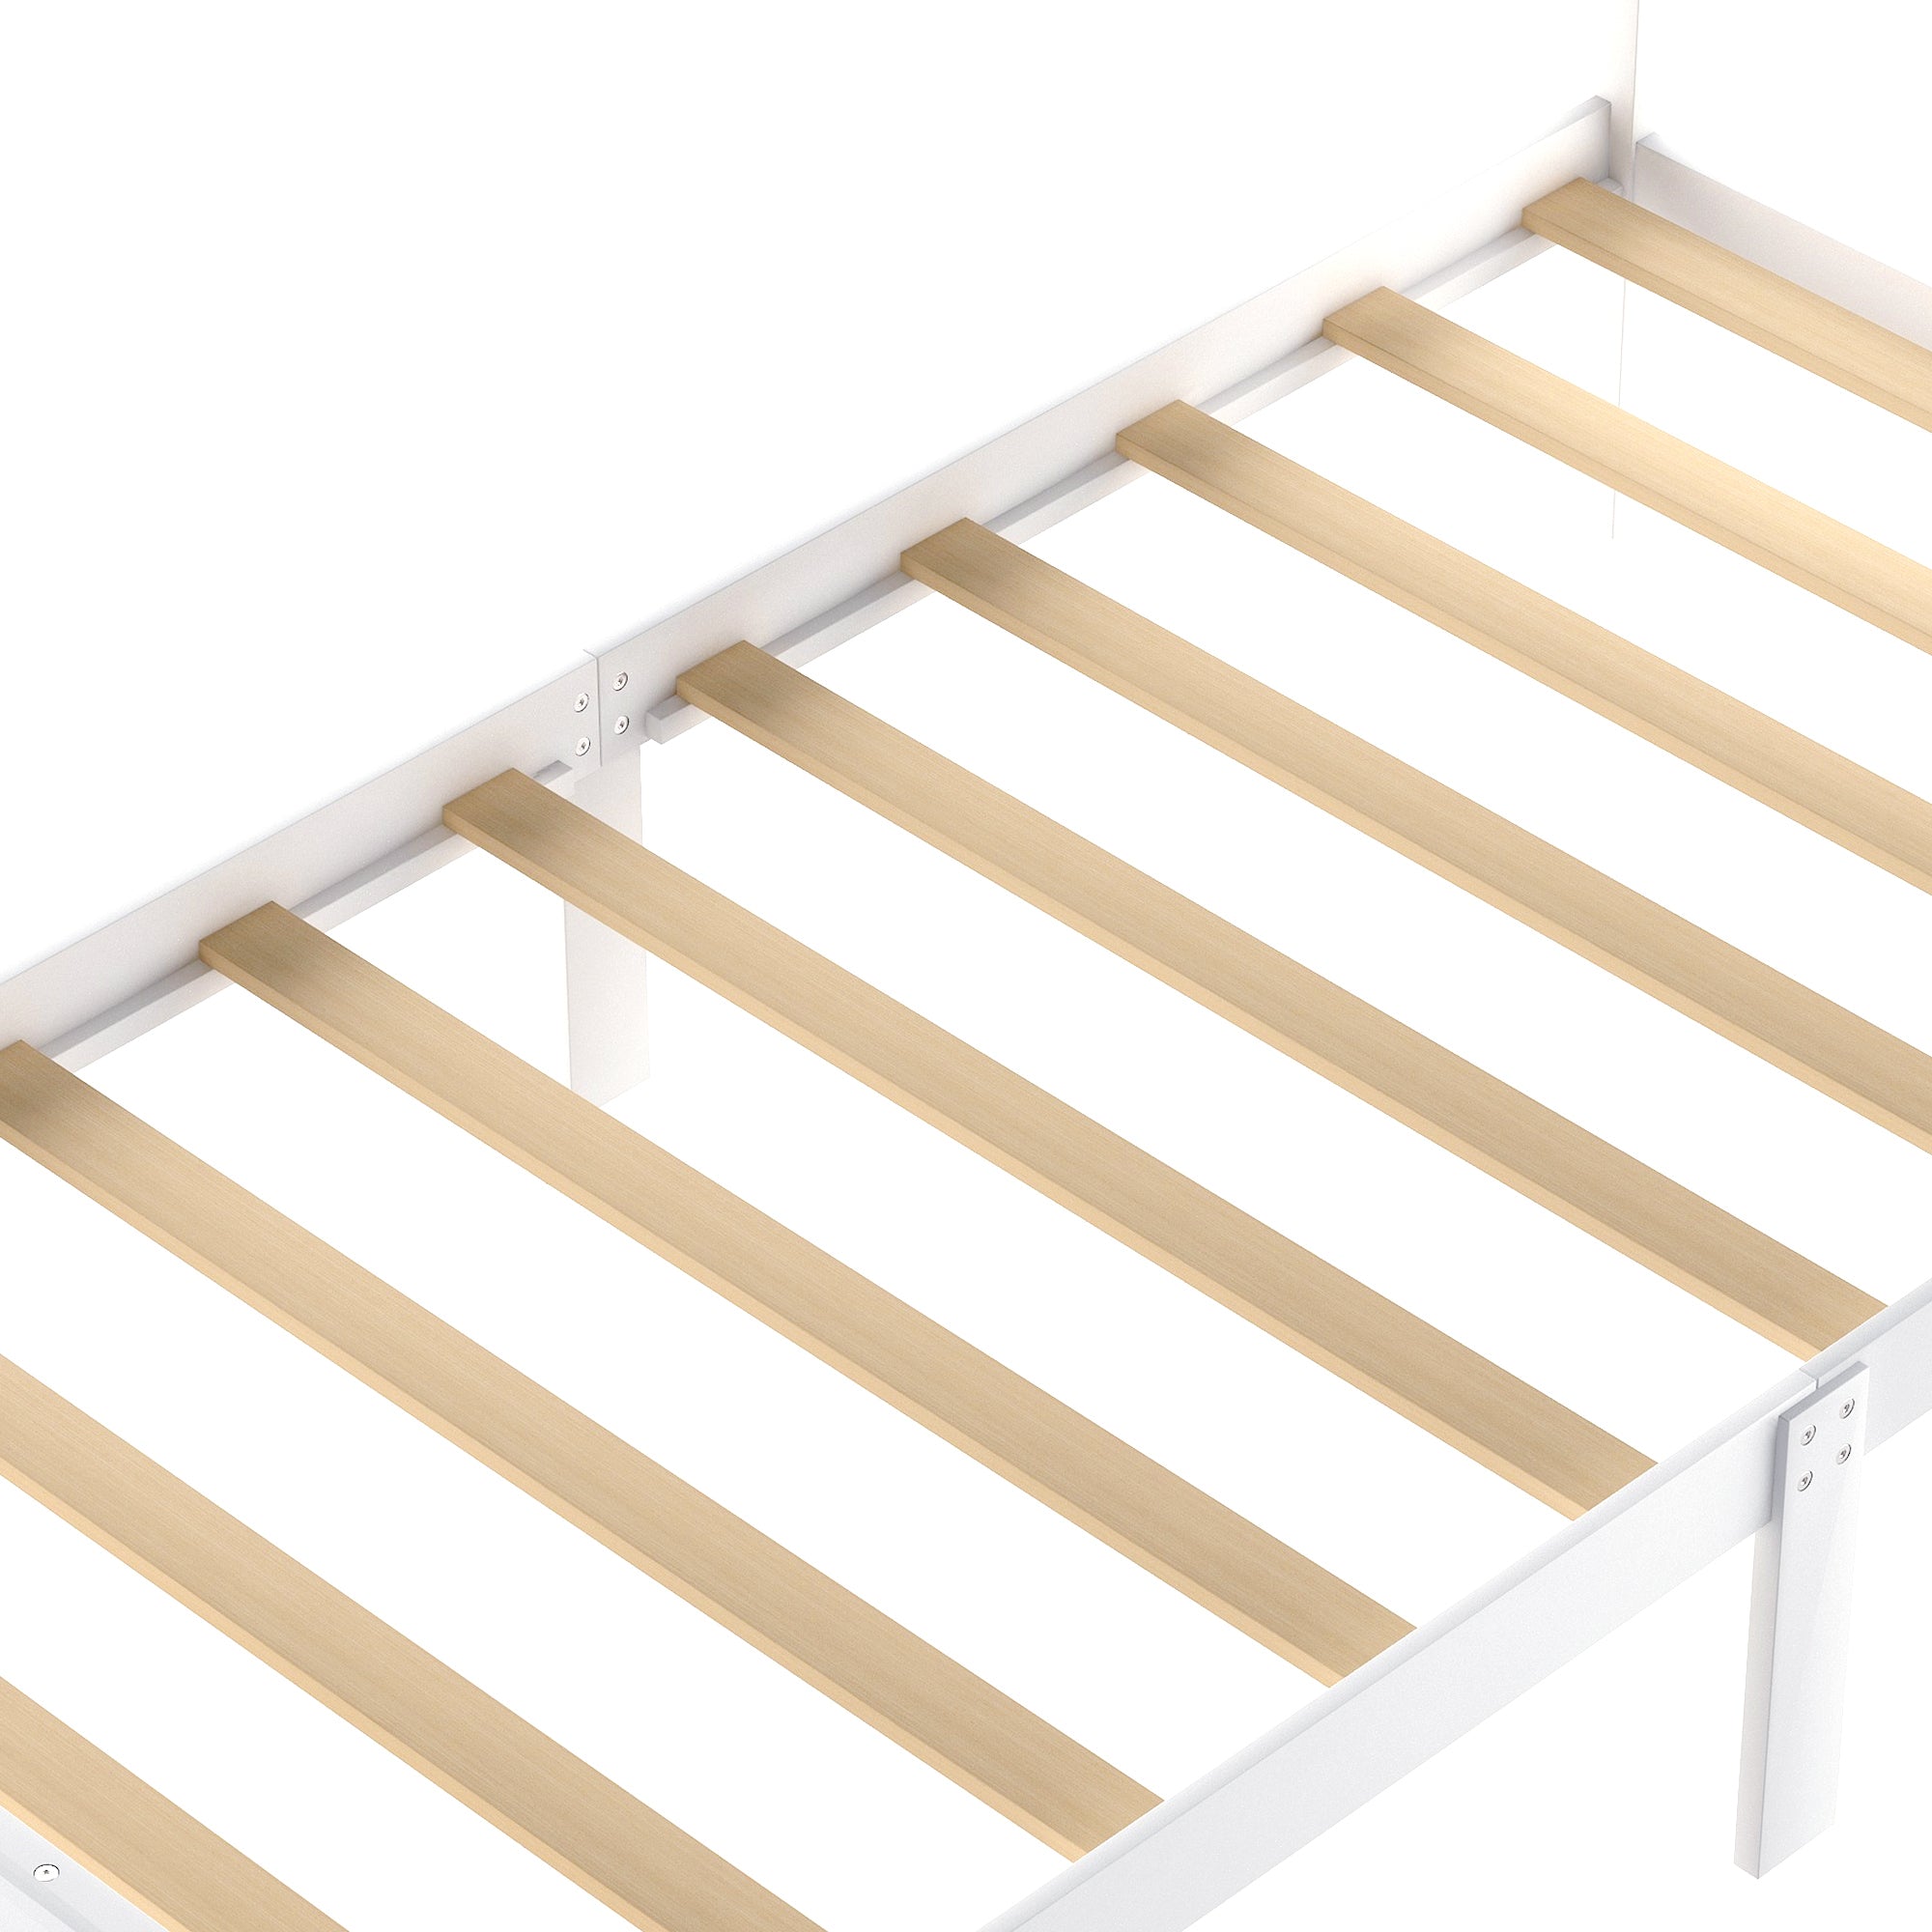 Twin Size Platform Bed with Under-bed Drawer (White)